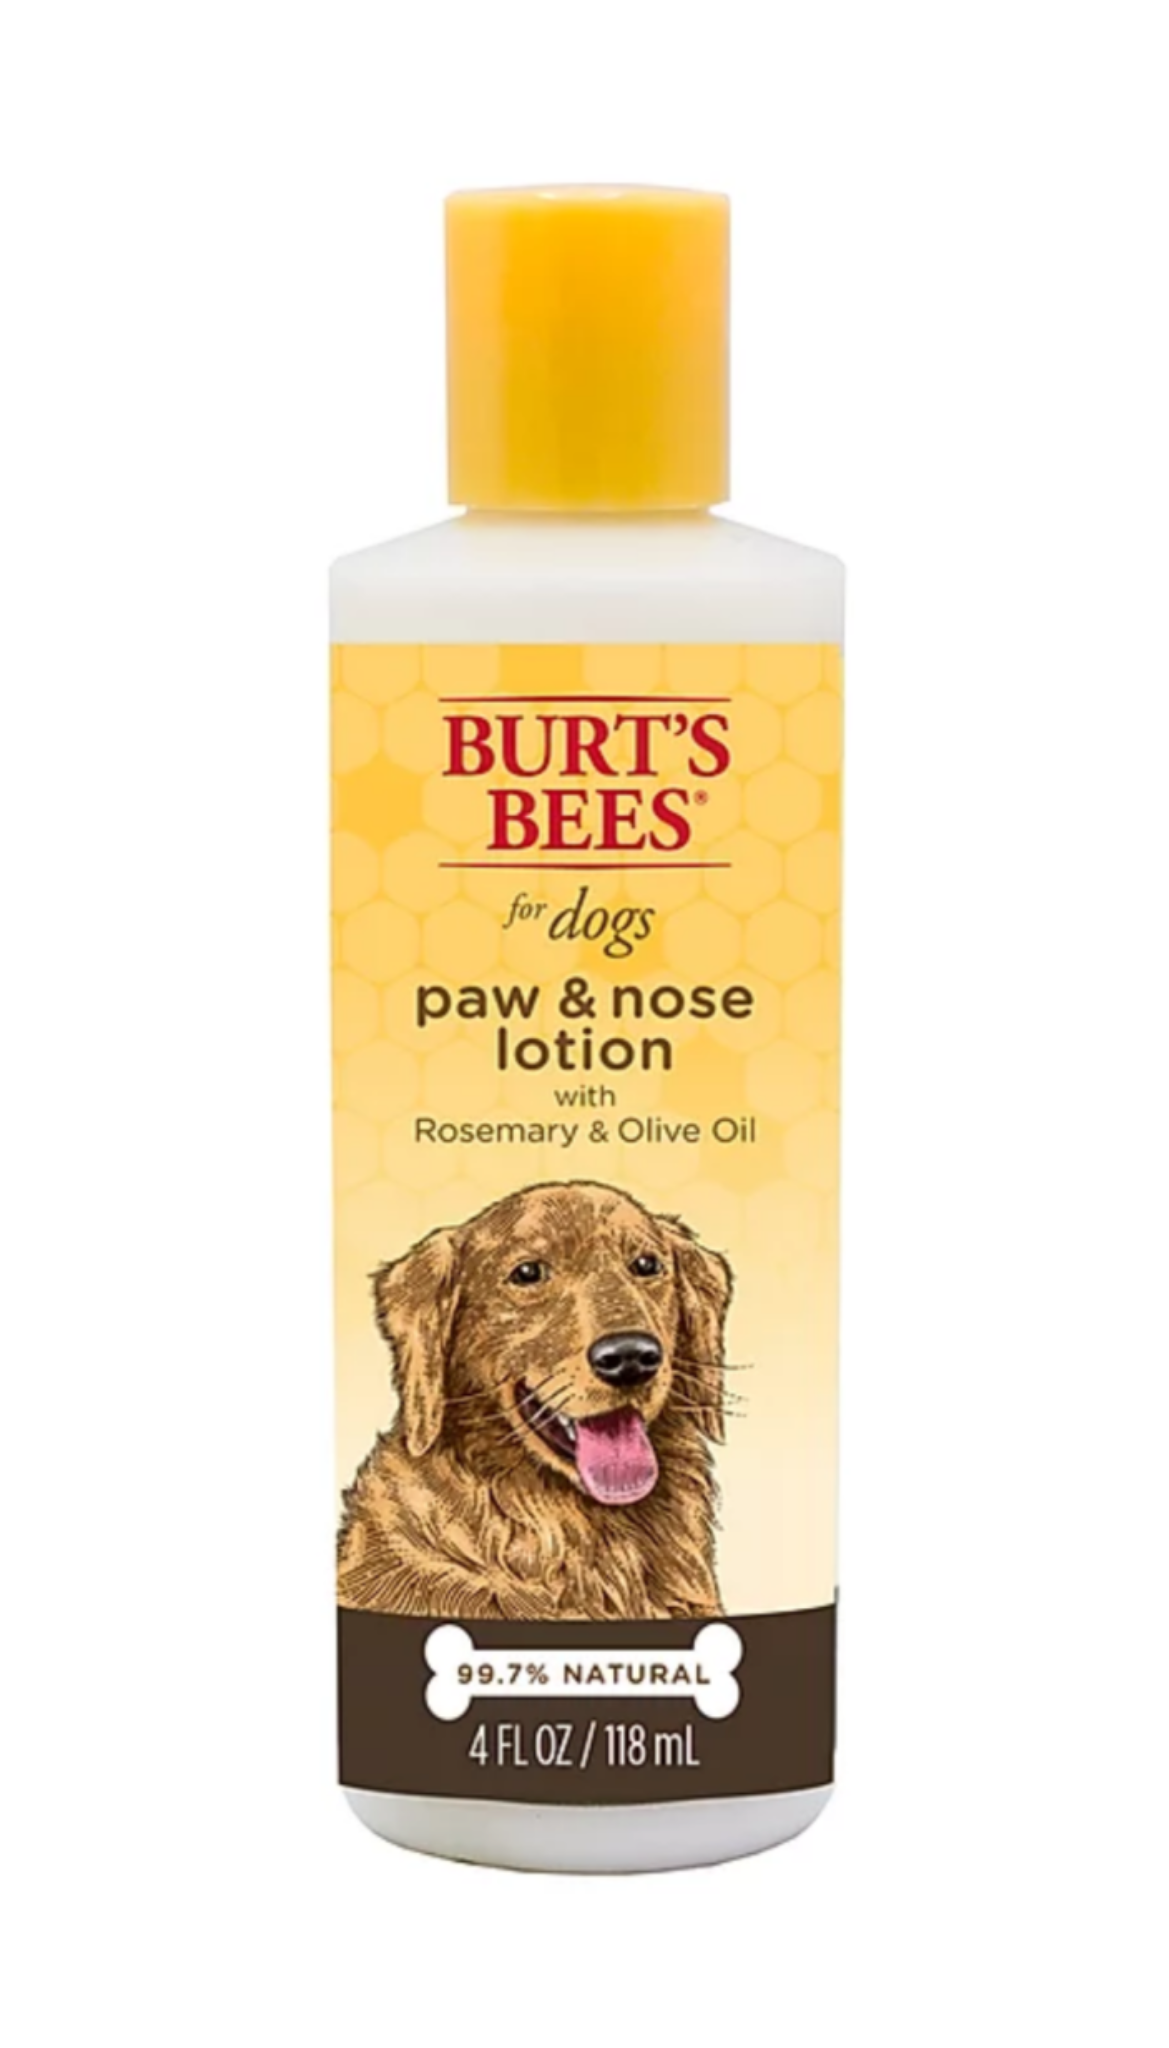 Burt's Bees Paw & Nose Lotion
With Rosemary & Olive Oil